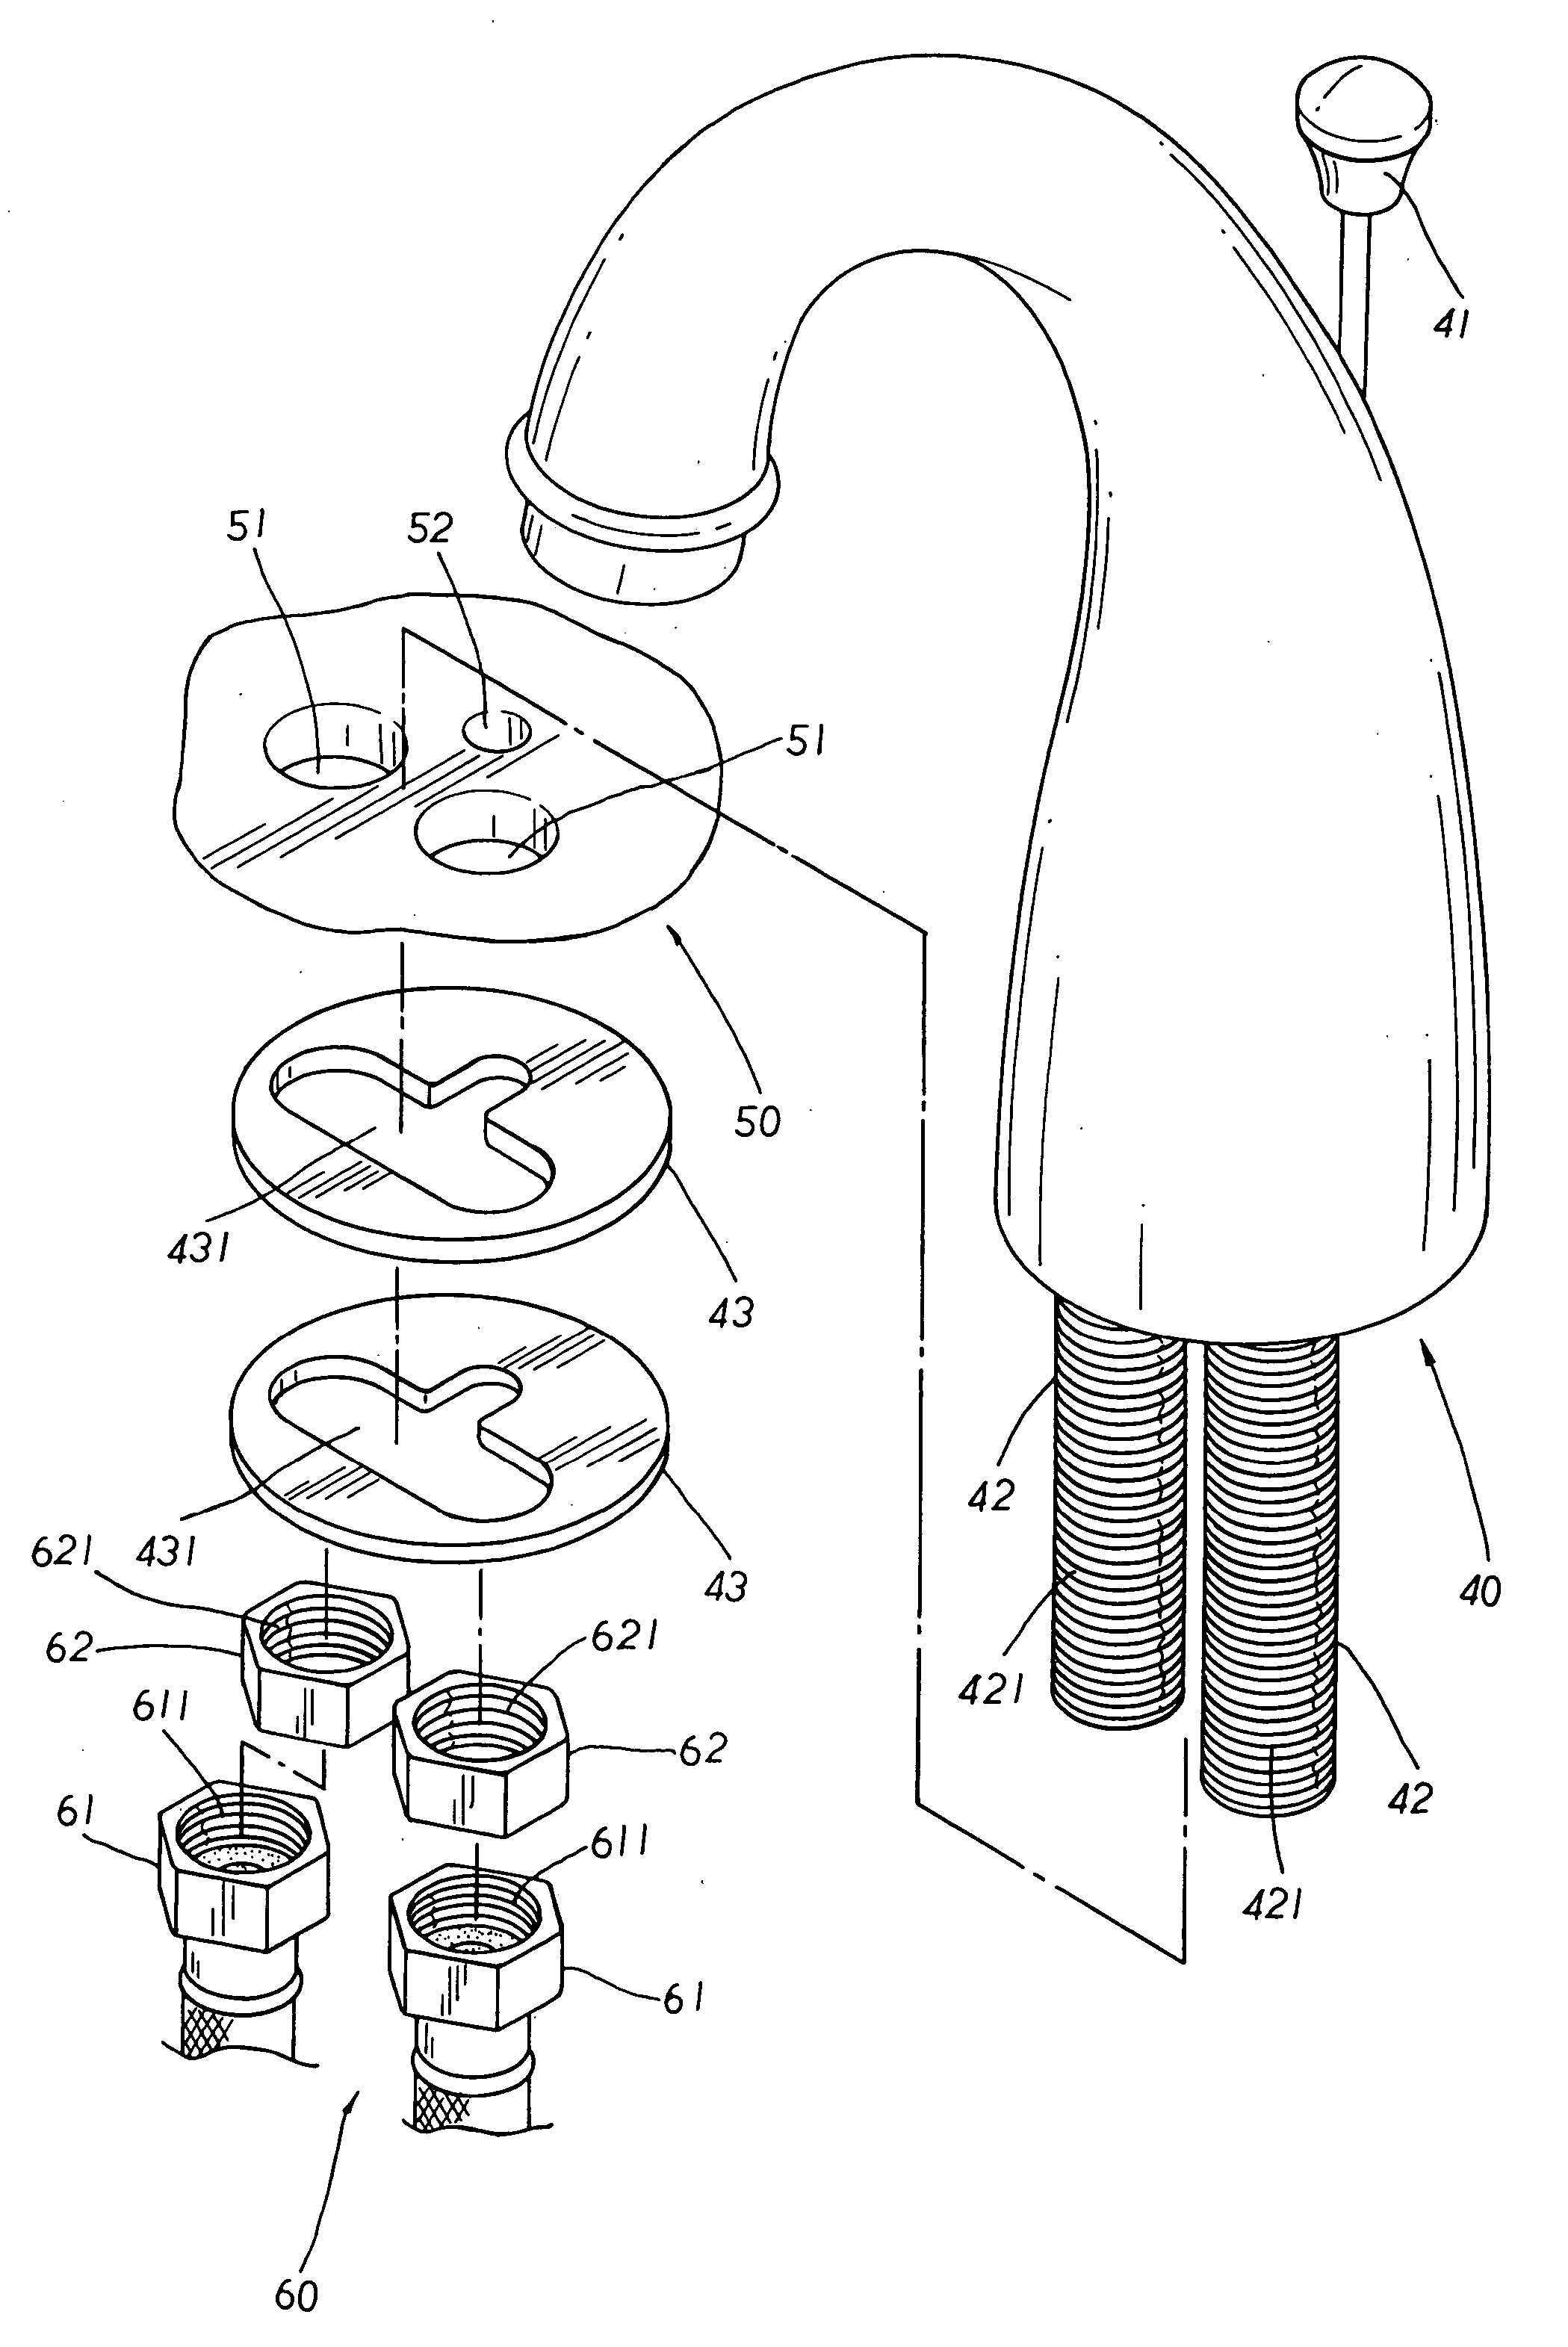 Water outlet tubing structure for faucets